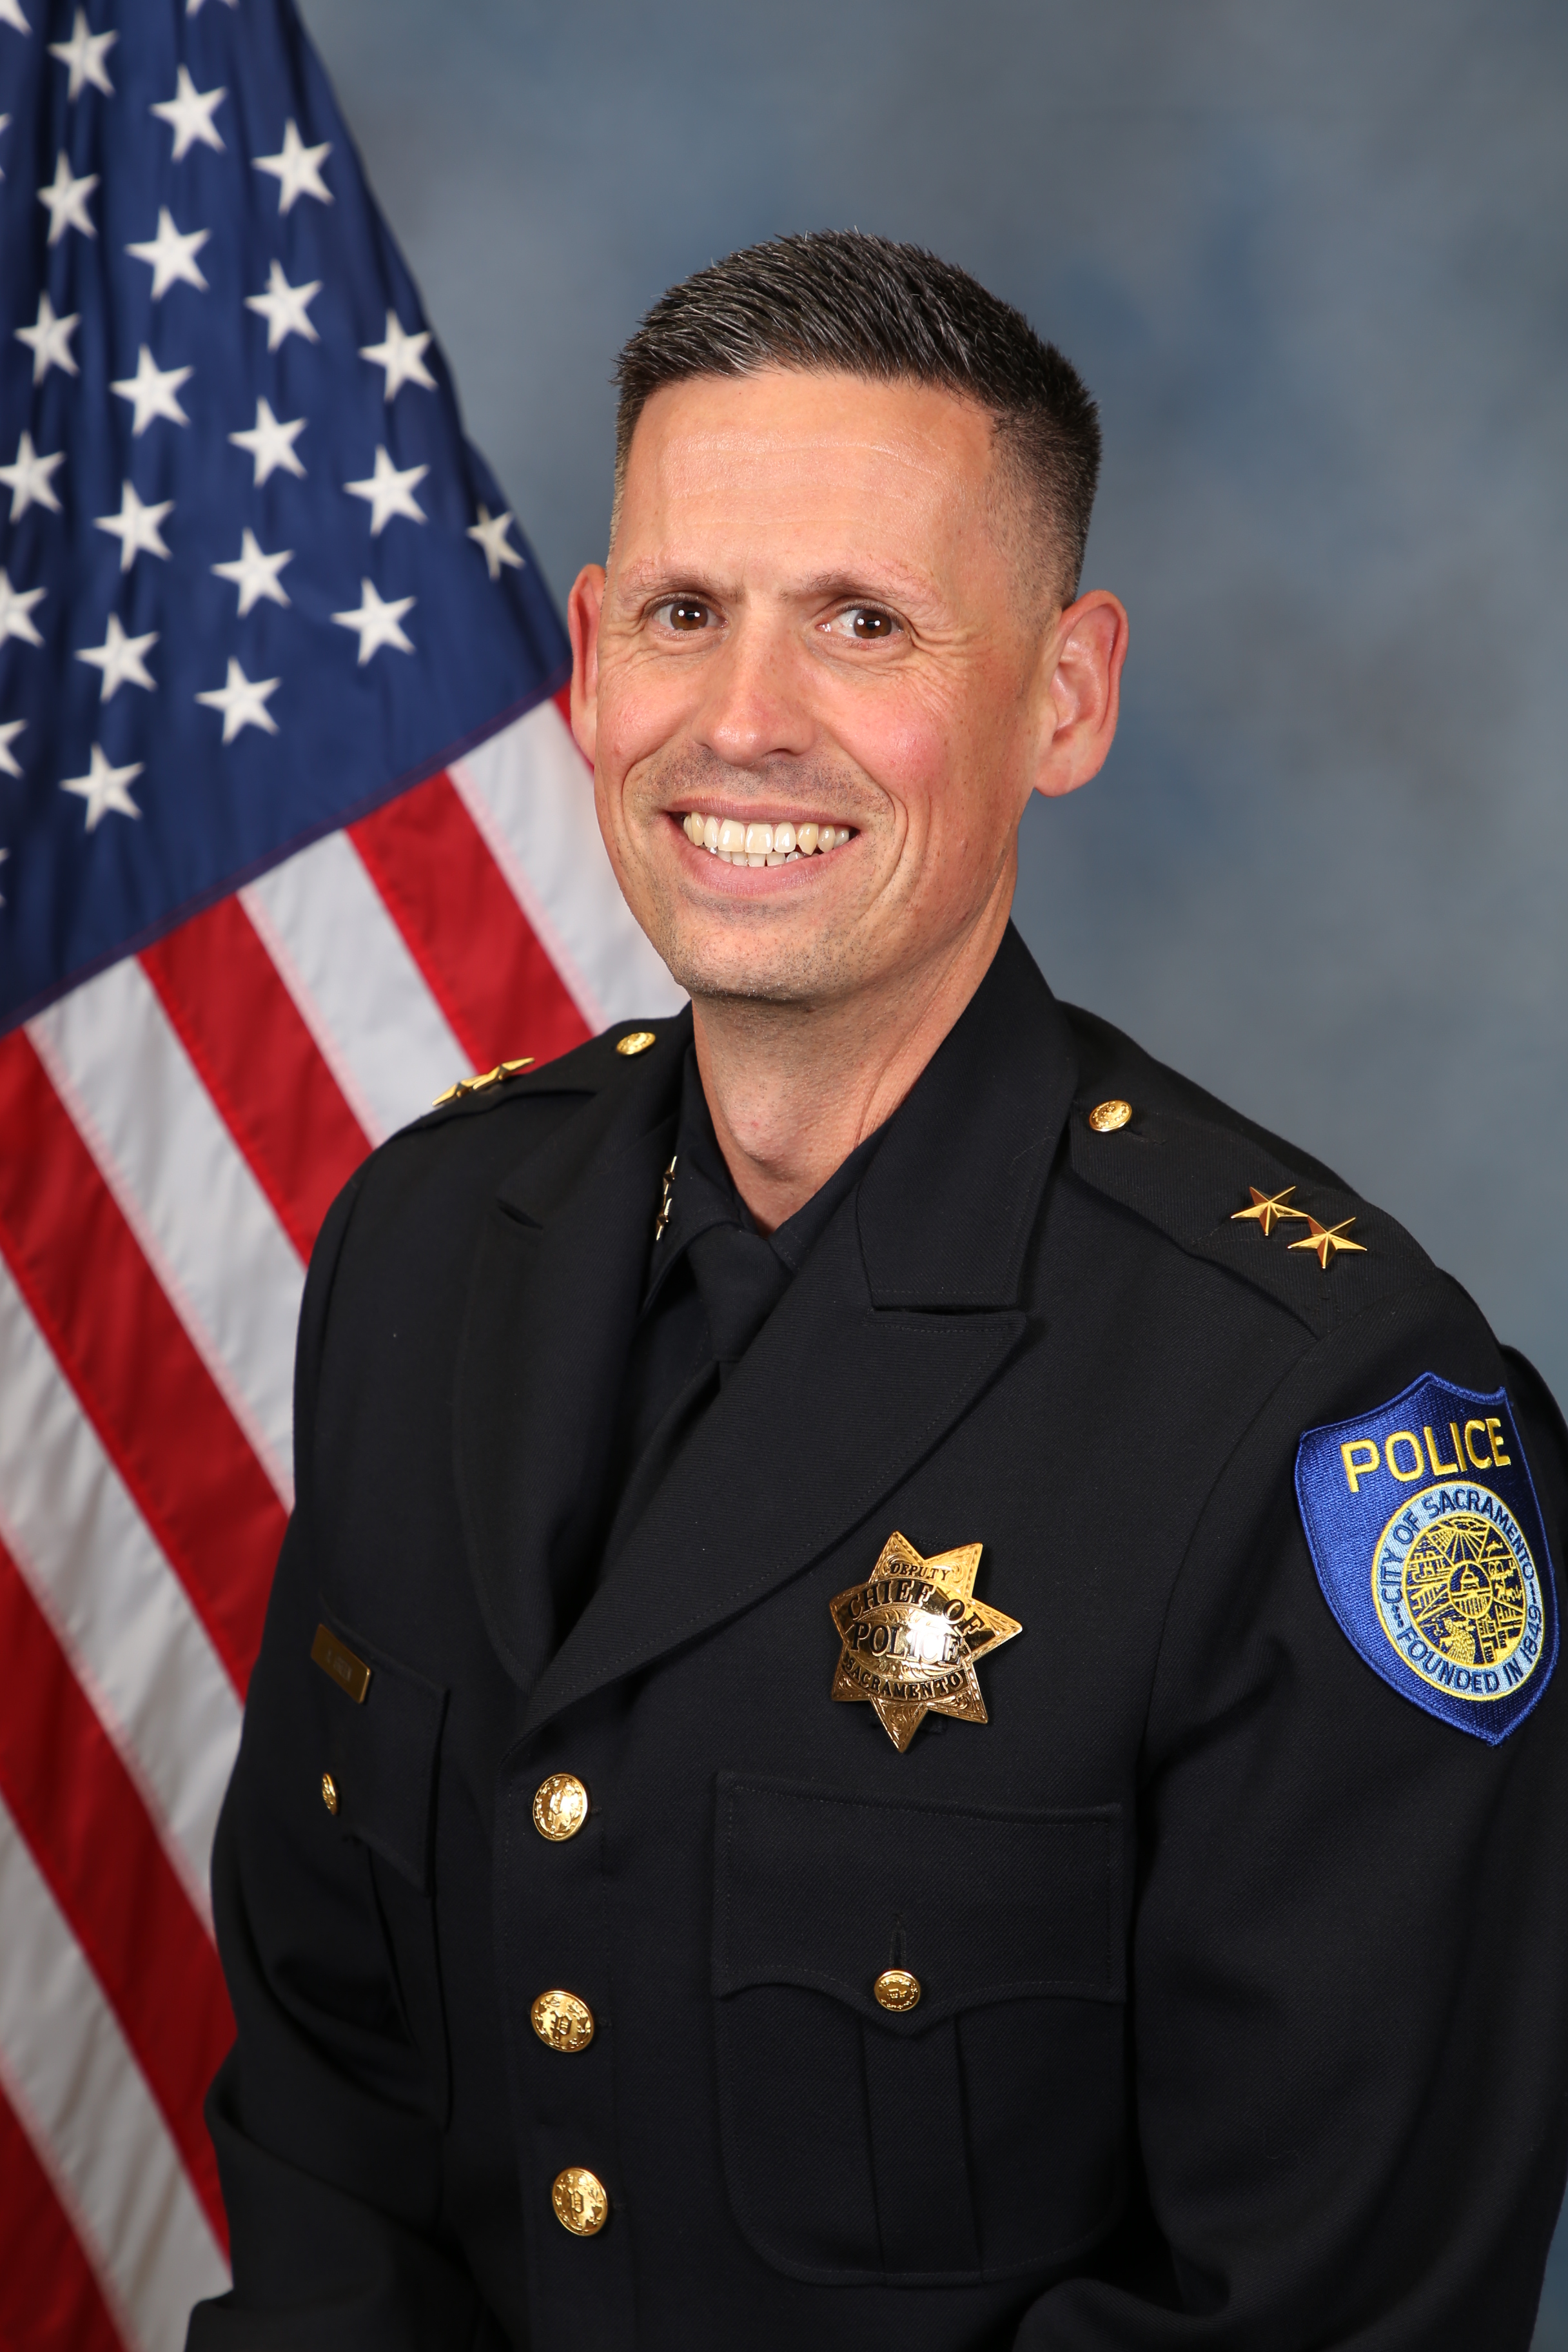 Photo of Deputy Chief Adam Green in uniform with the American flag in the background.